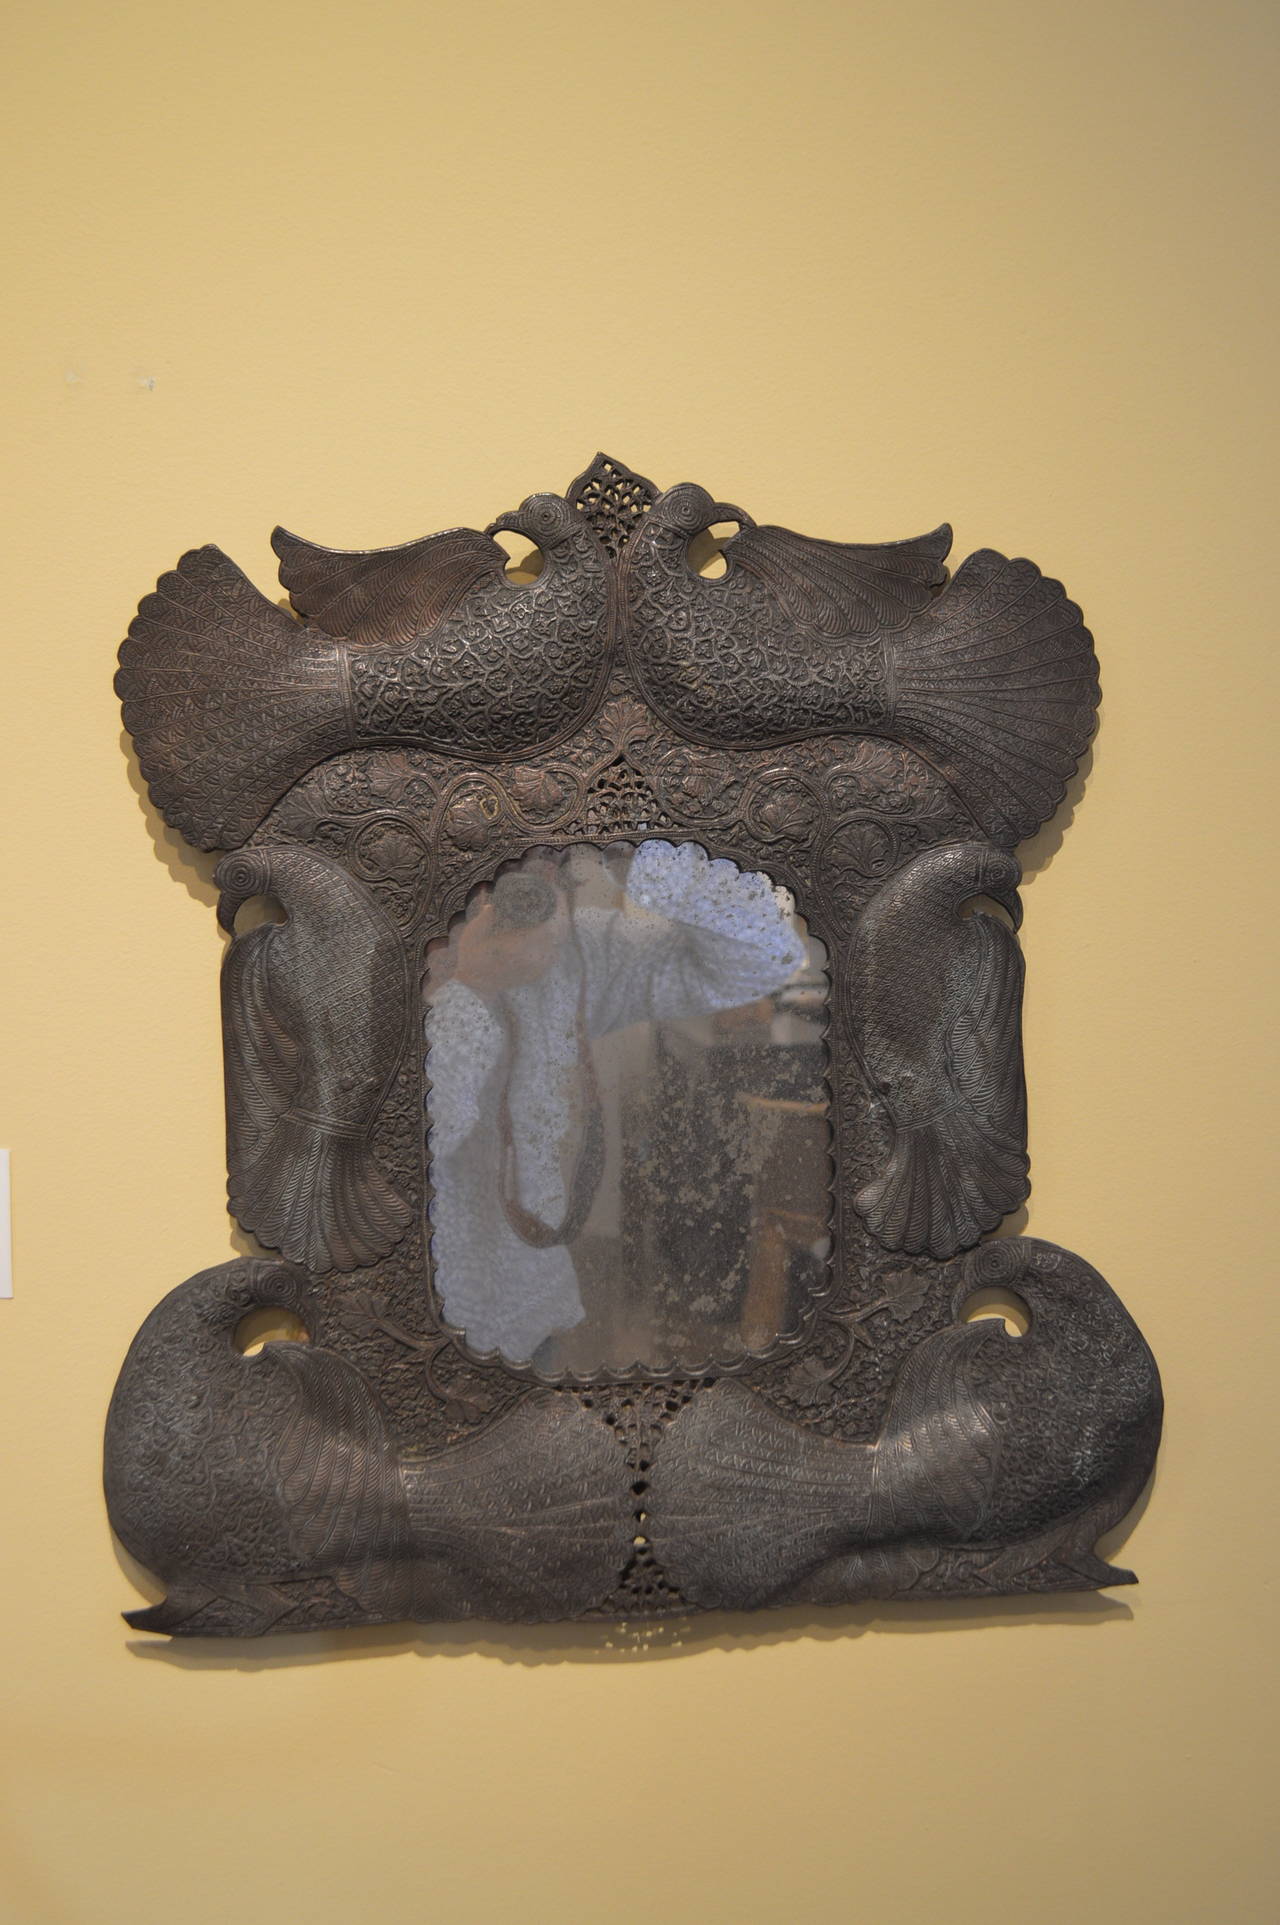 The craftsmanship of this mirror is exquisitely executed.
Most likely an alloy of copper and some other metal.